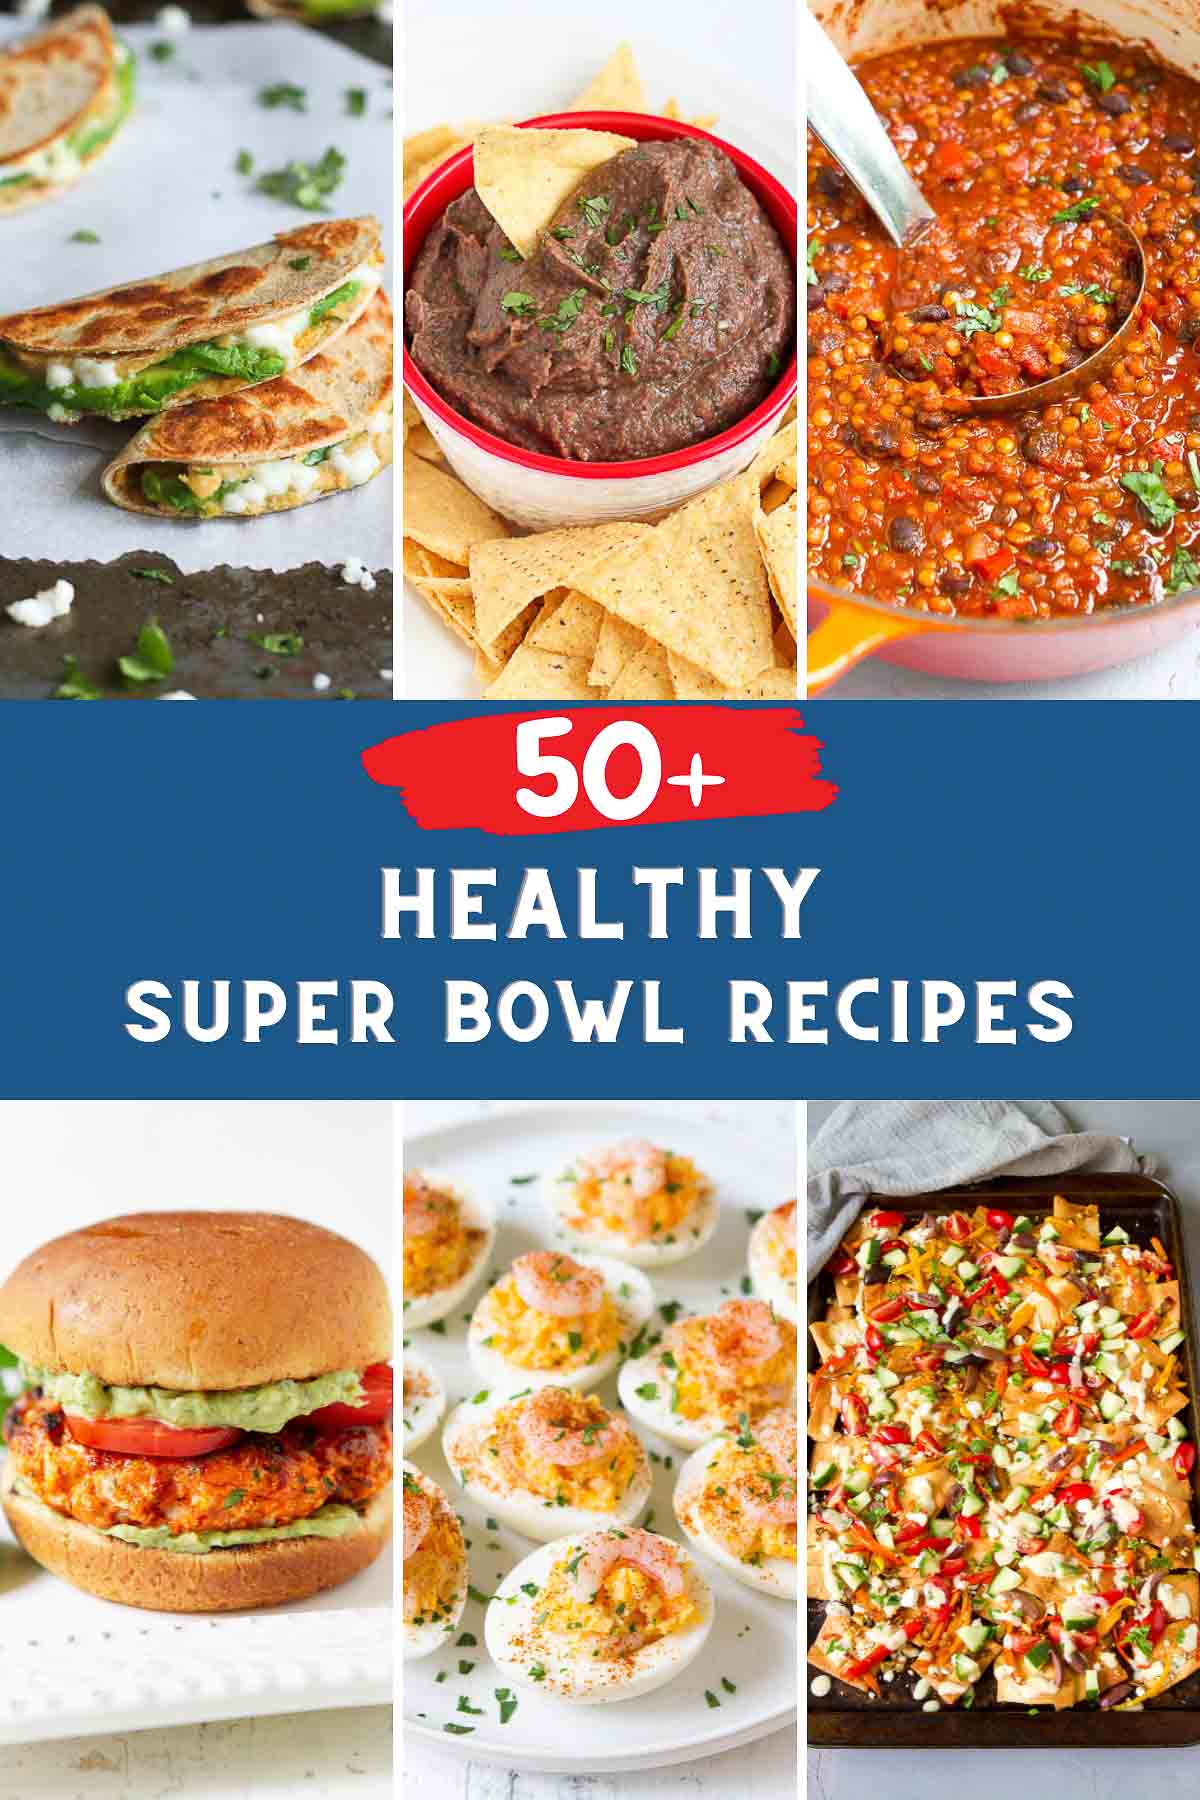 It's time to sit down in front of the TV and load up the table with healthy Super Bowl recipes for the big game! Appetizers, pizza, sandwiches, dips, burgers and more! 